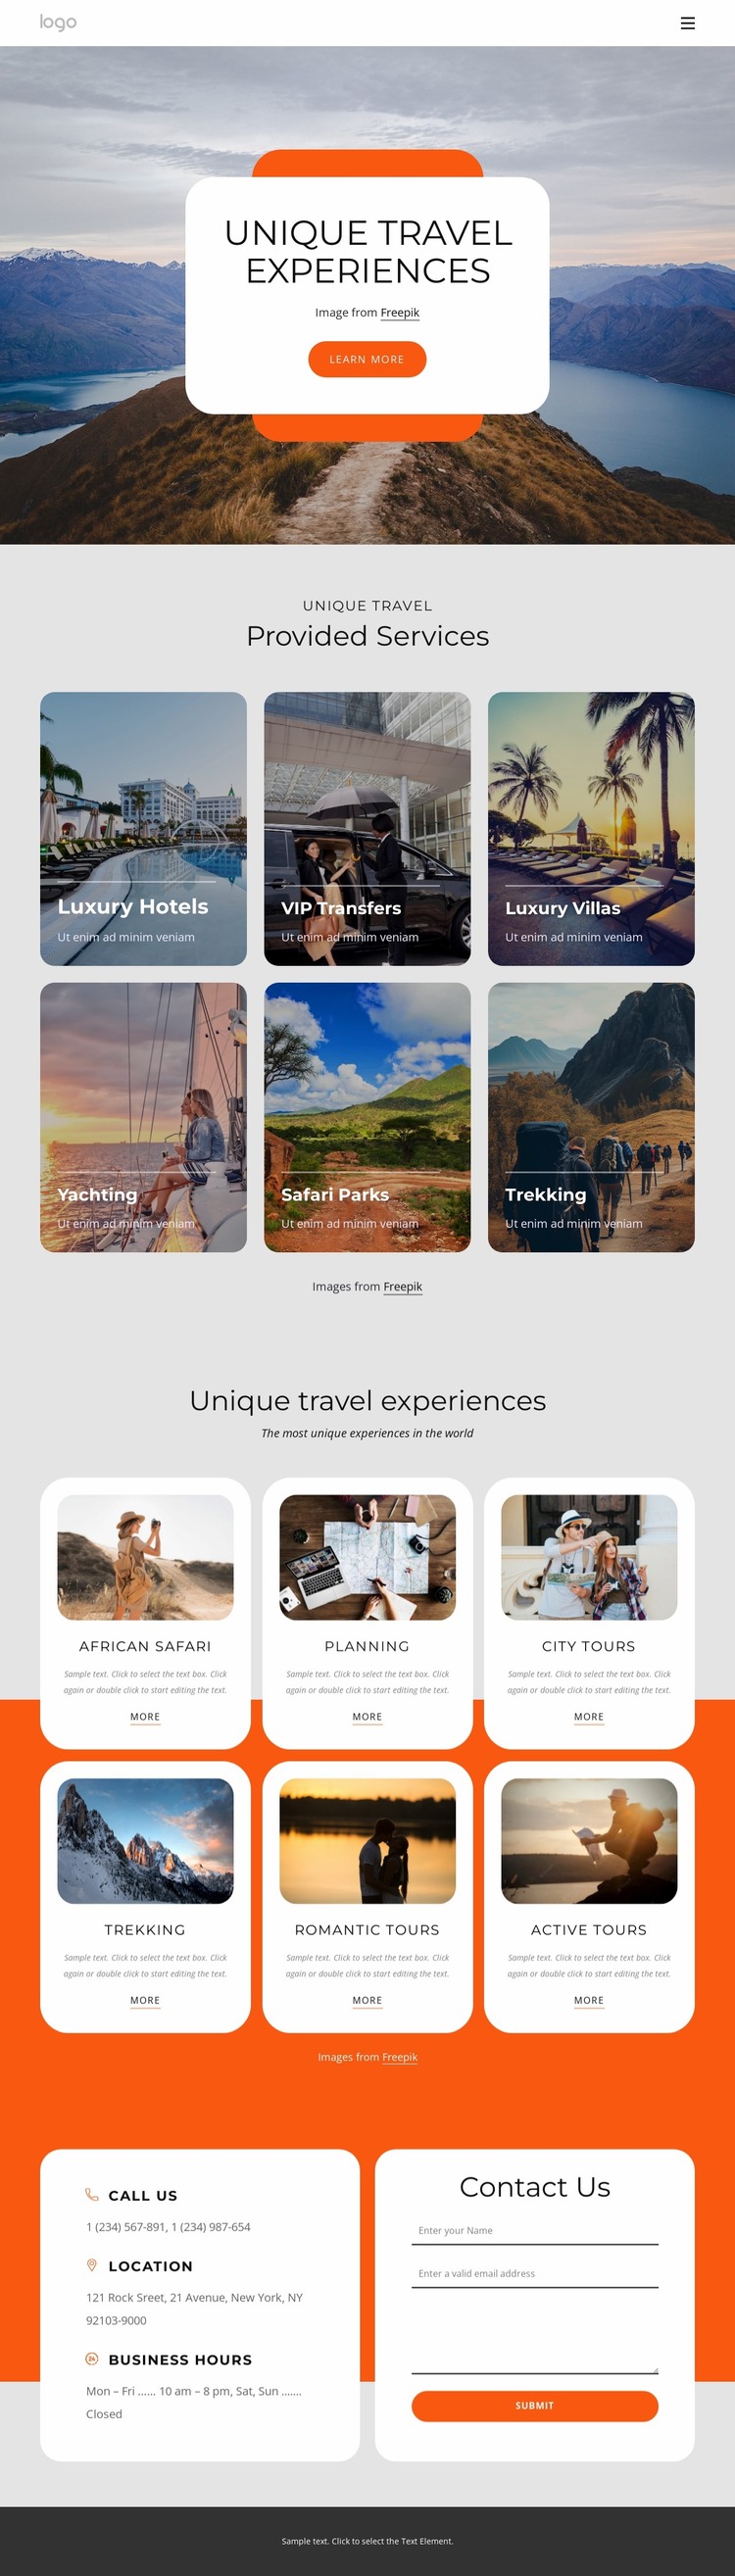 Luxury small-group travel experience Website Mockup